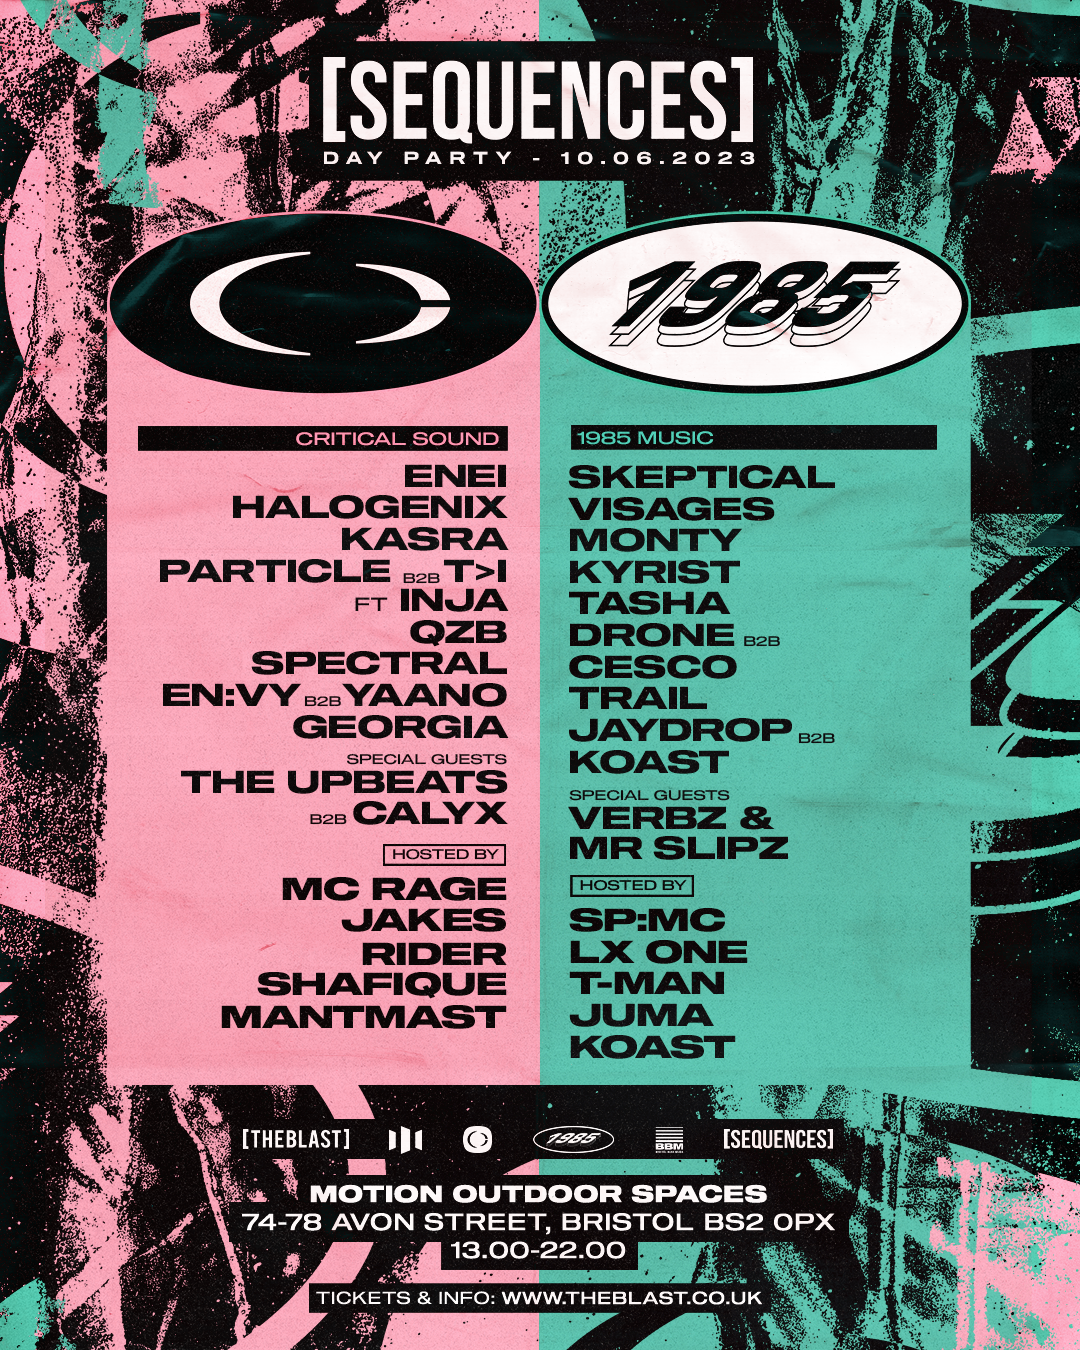 Critical Sound x 1985 Music Day Party Bristol // [SEQUENCES] - フライヤー表